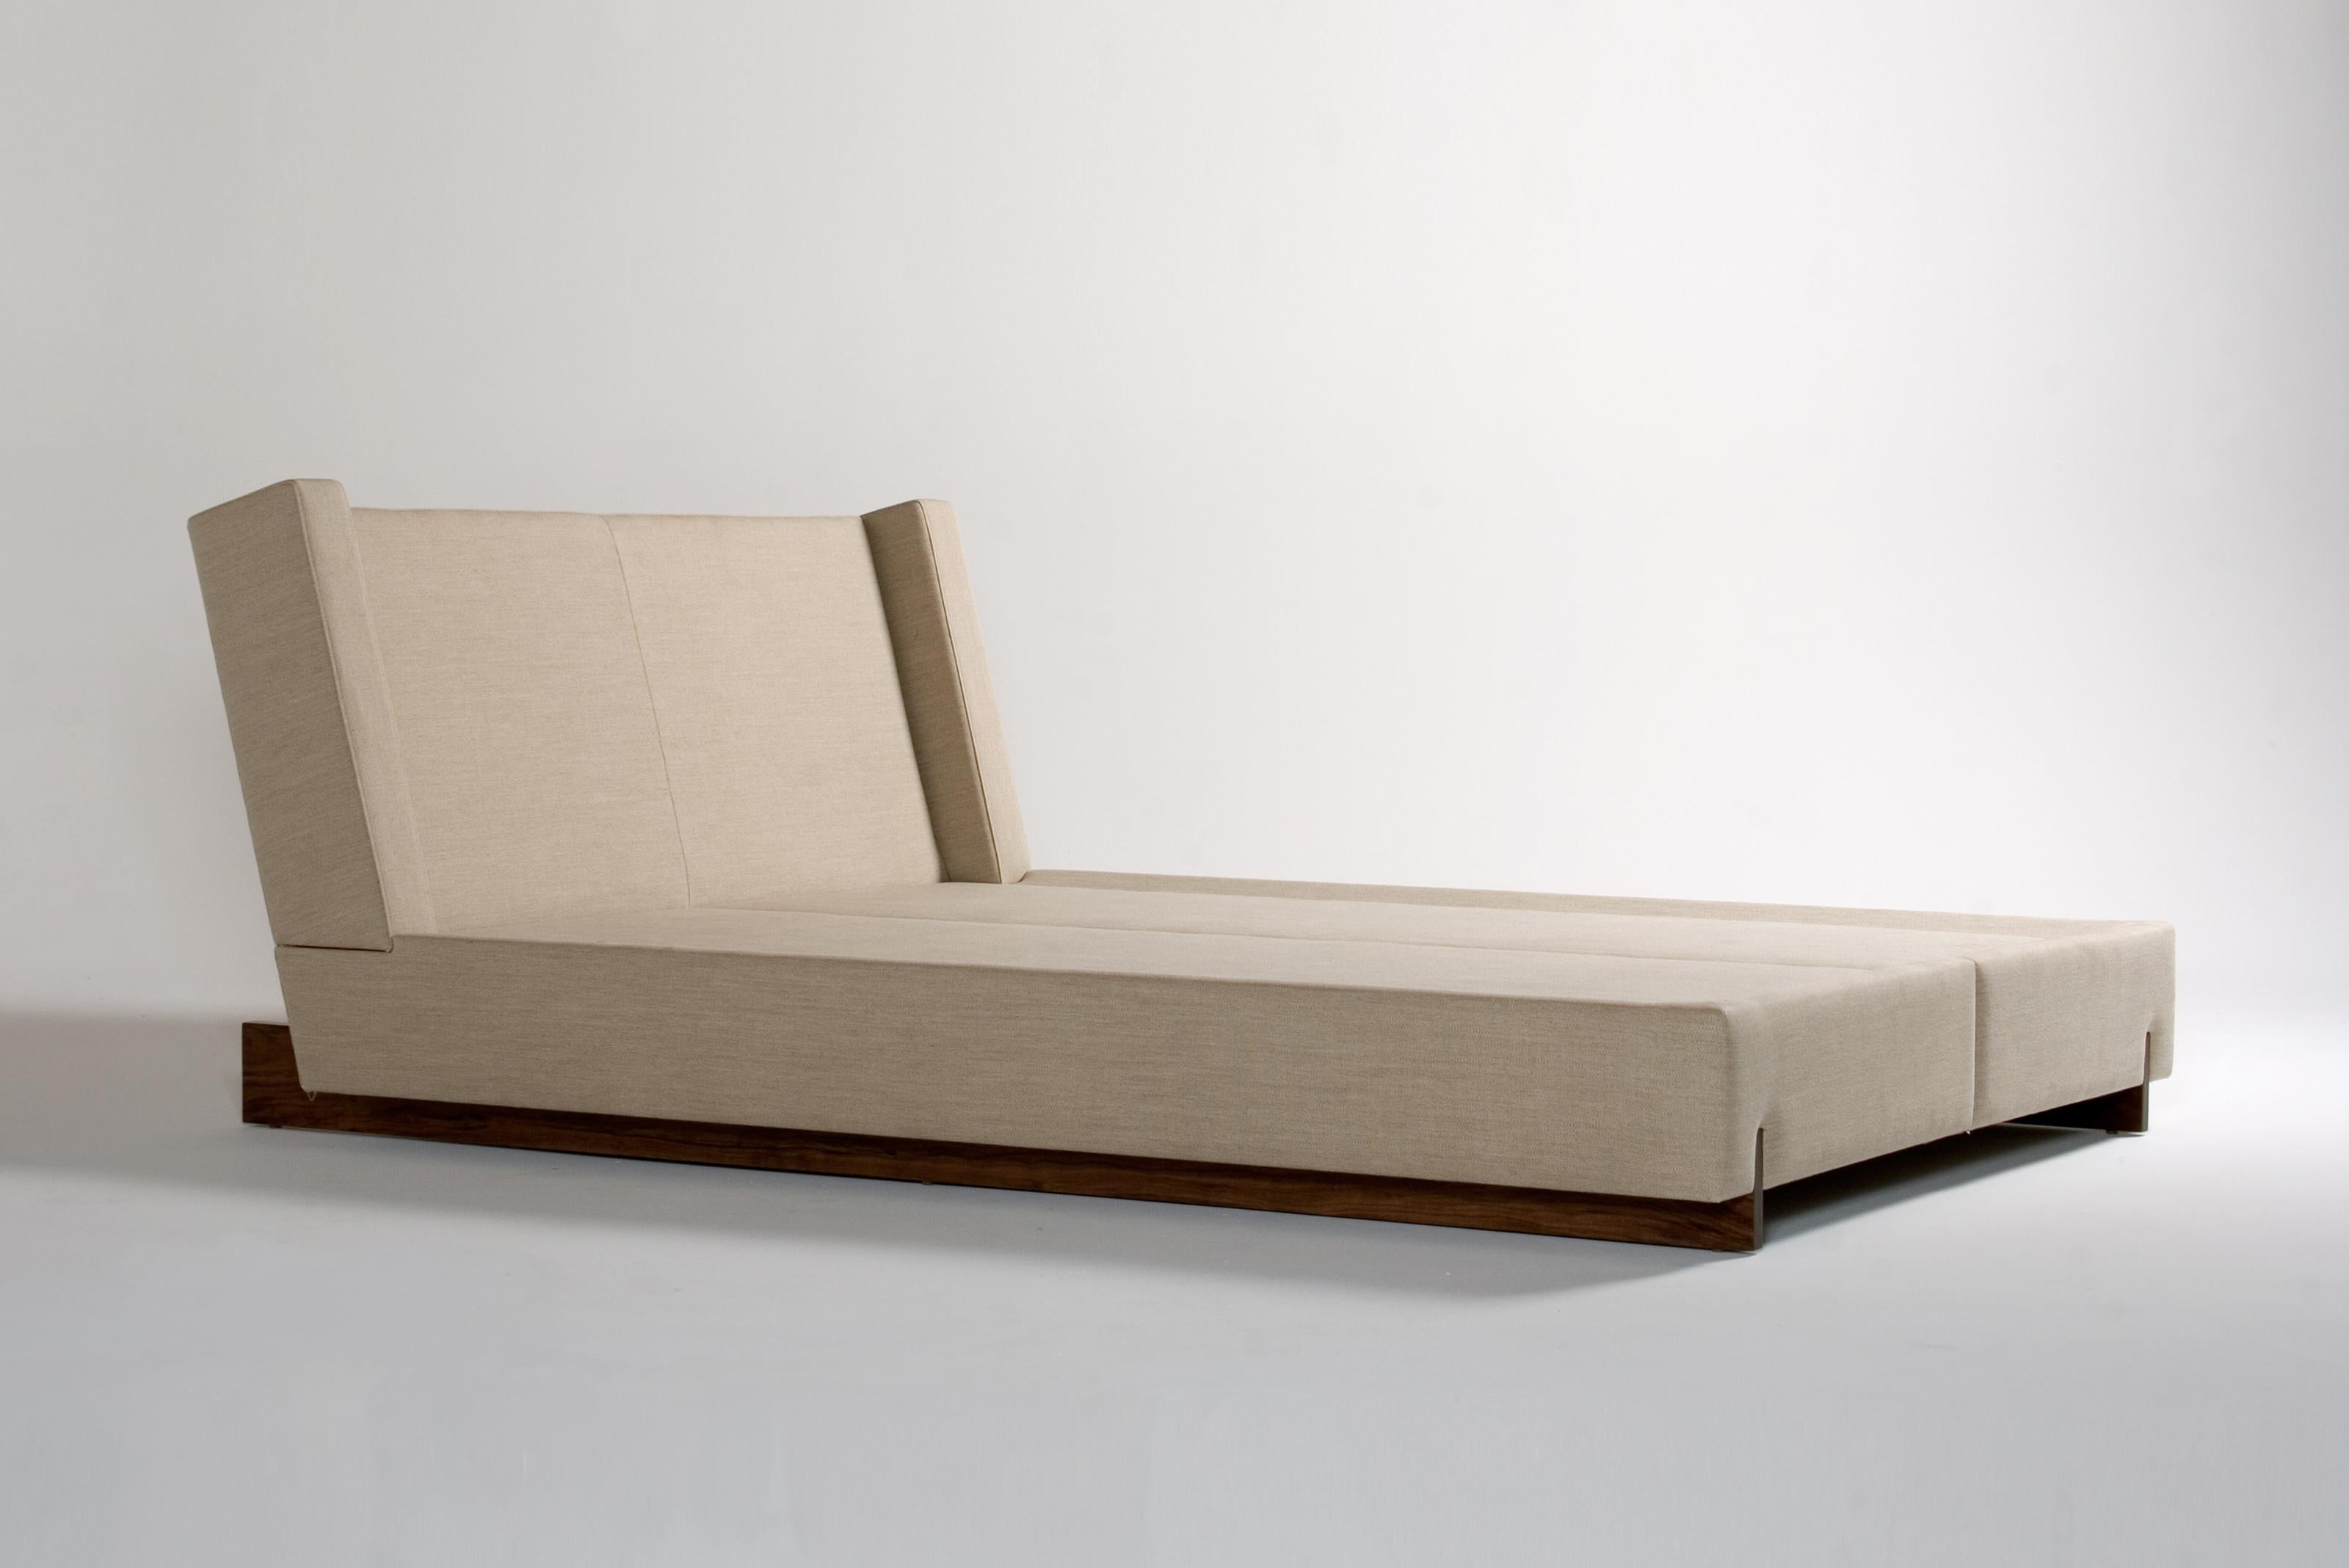 Trax Cali King Bed by Phase Design
Dimensions: D 242.6 x W 203.2 x H 94 cm. 
Materials: Walnut and upholstery.

Solid wood legs with upholstered body. Available in walnut, white oak, or ebonized oak. Upholstery may be sourced in Customer Own